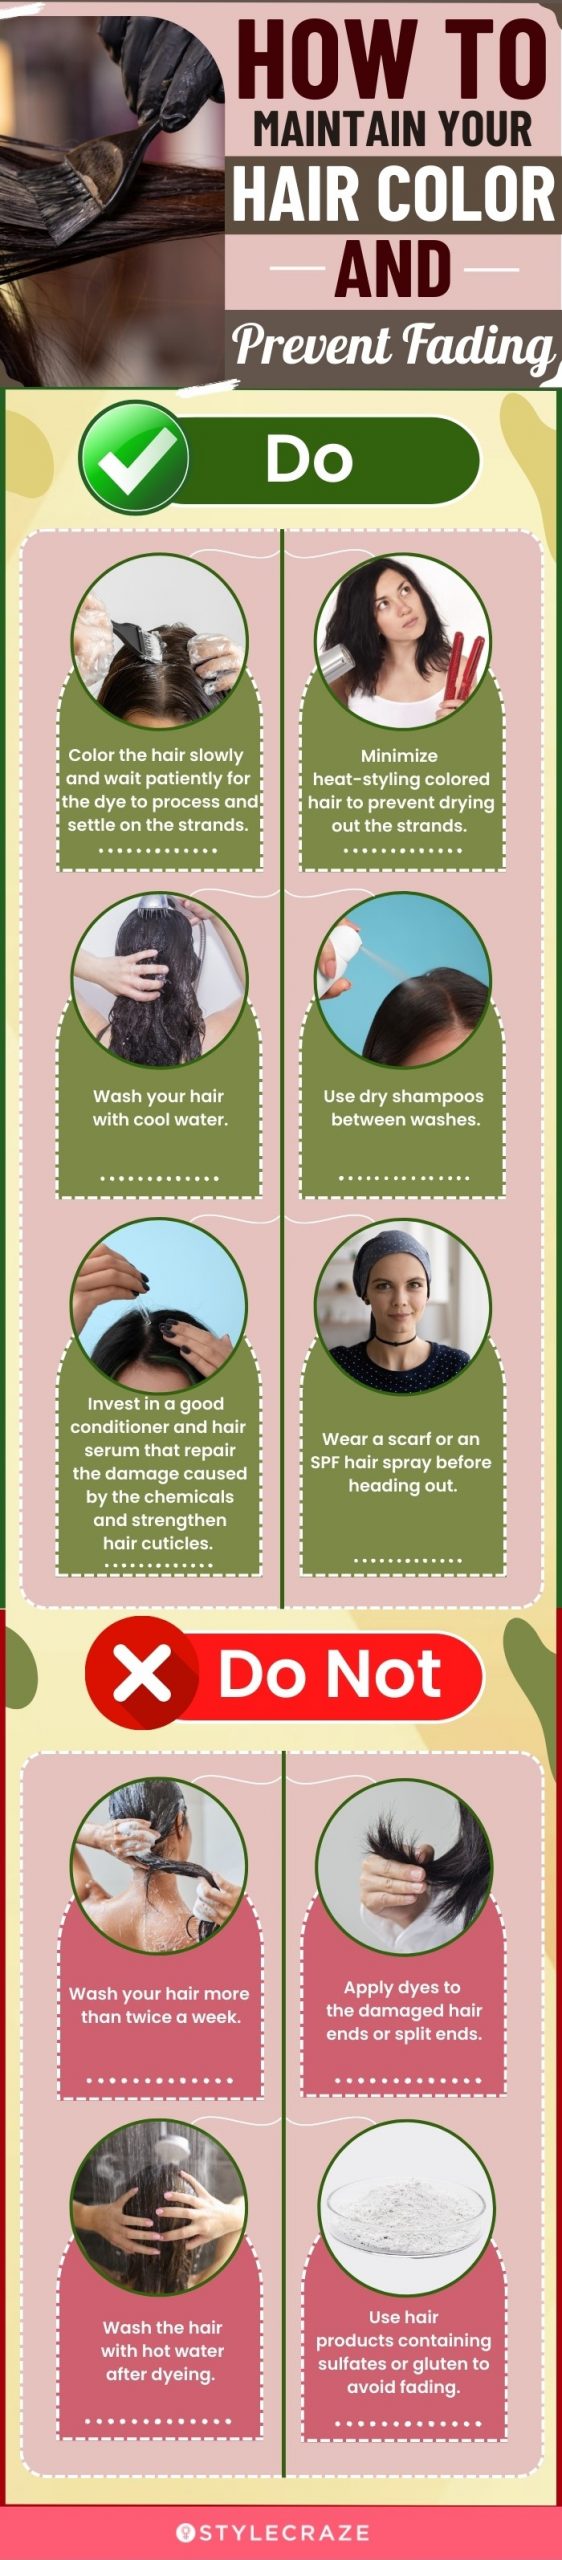 Tips To Maintain Your Hair Color (infographic)